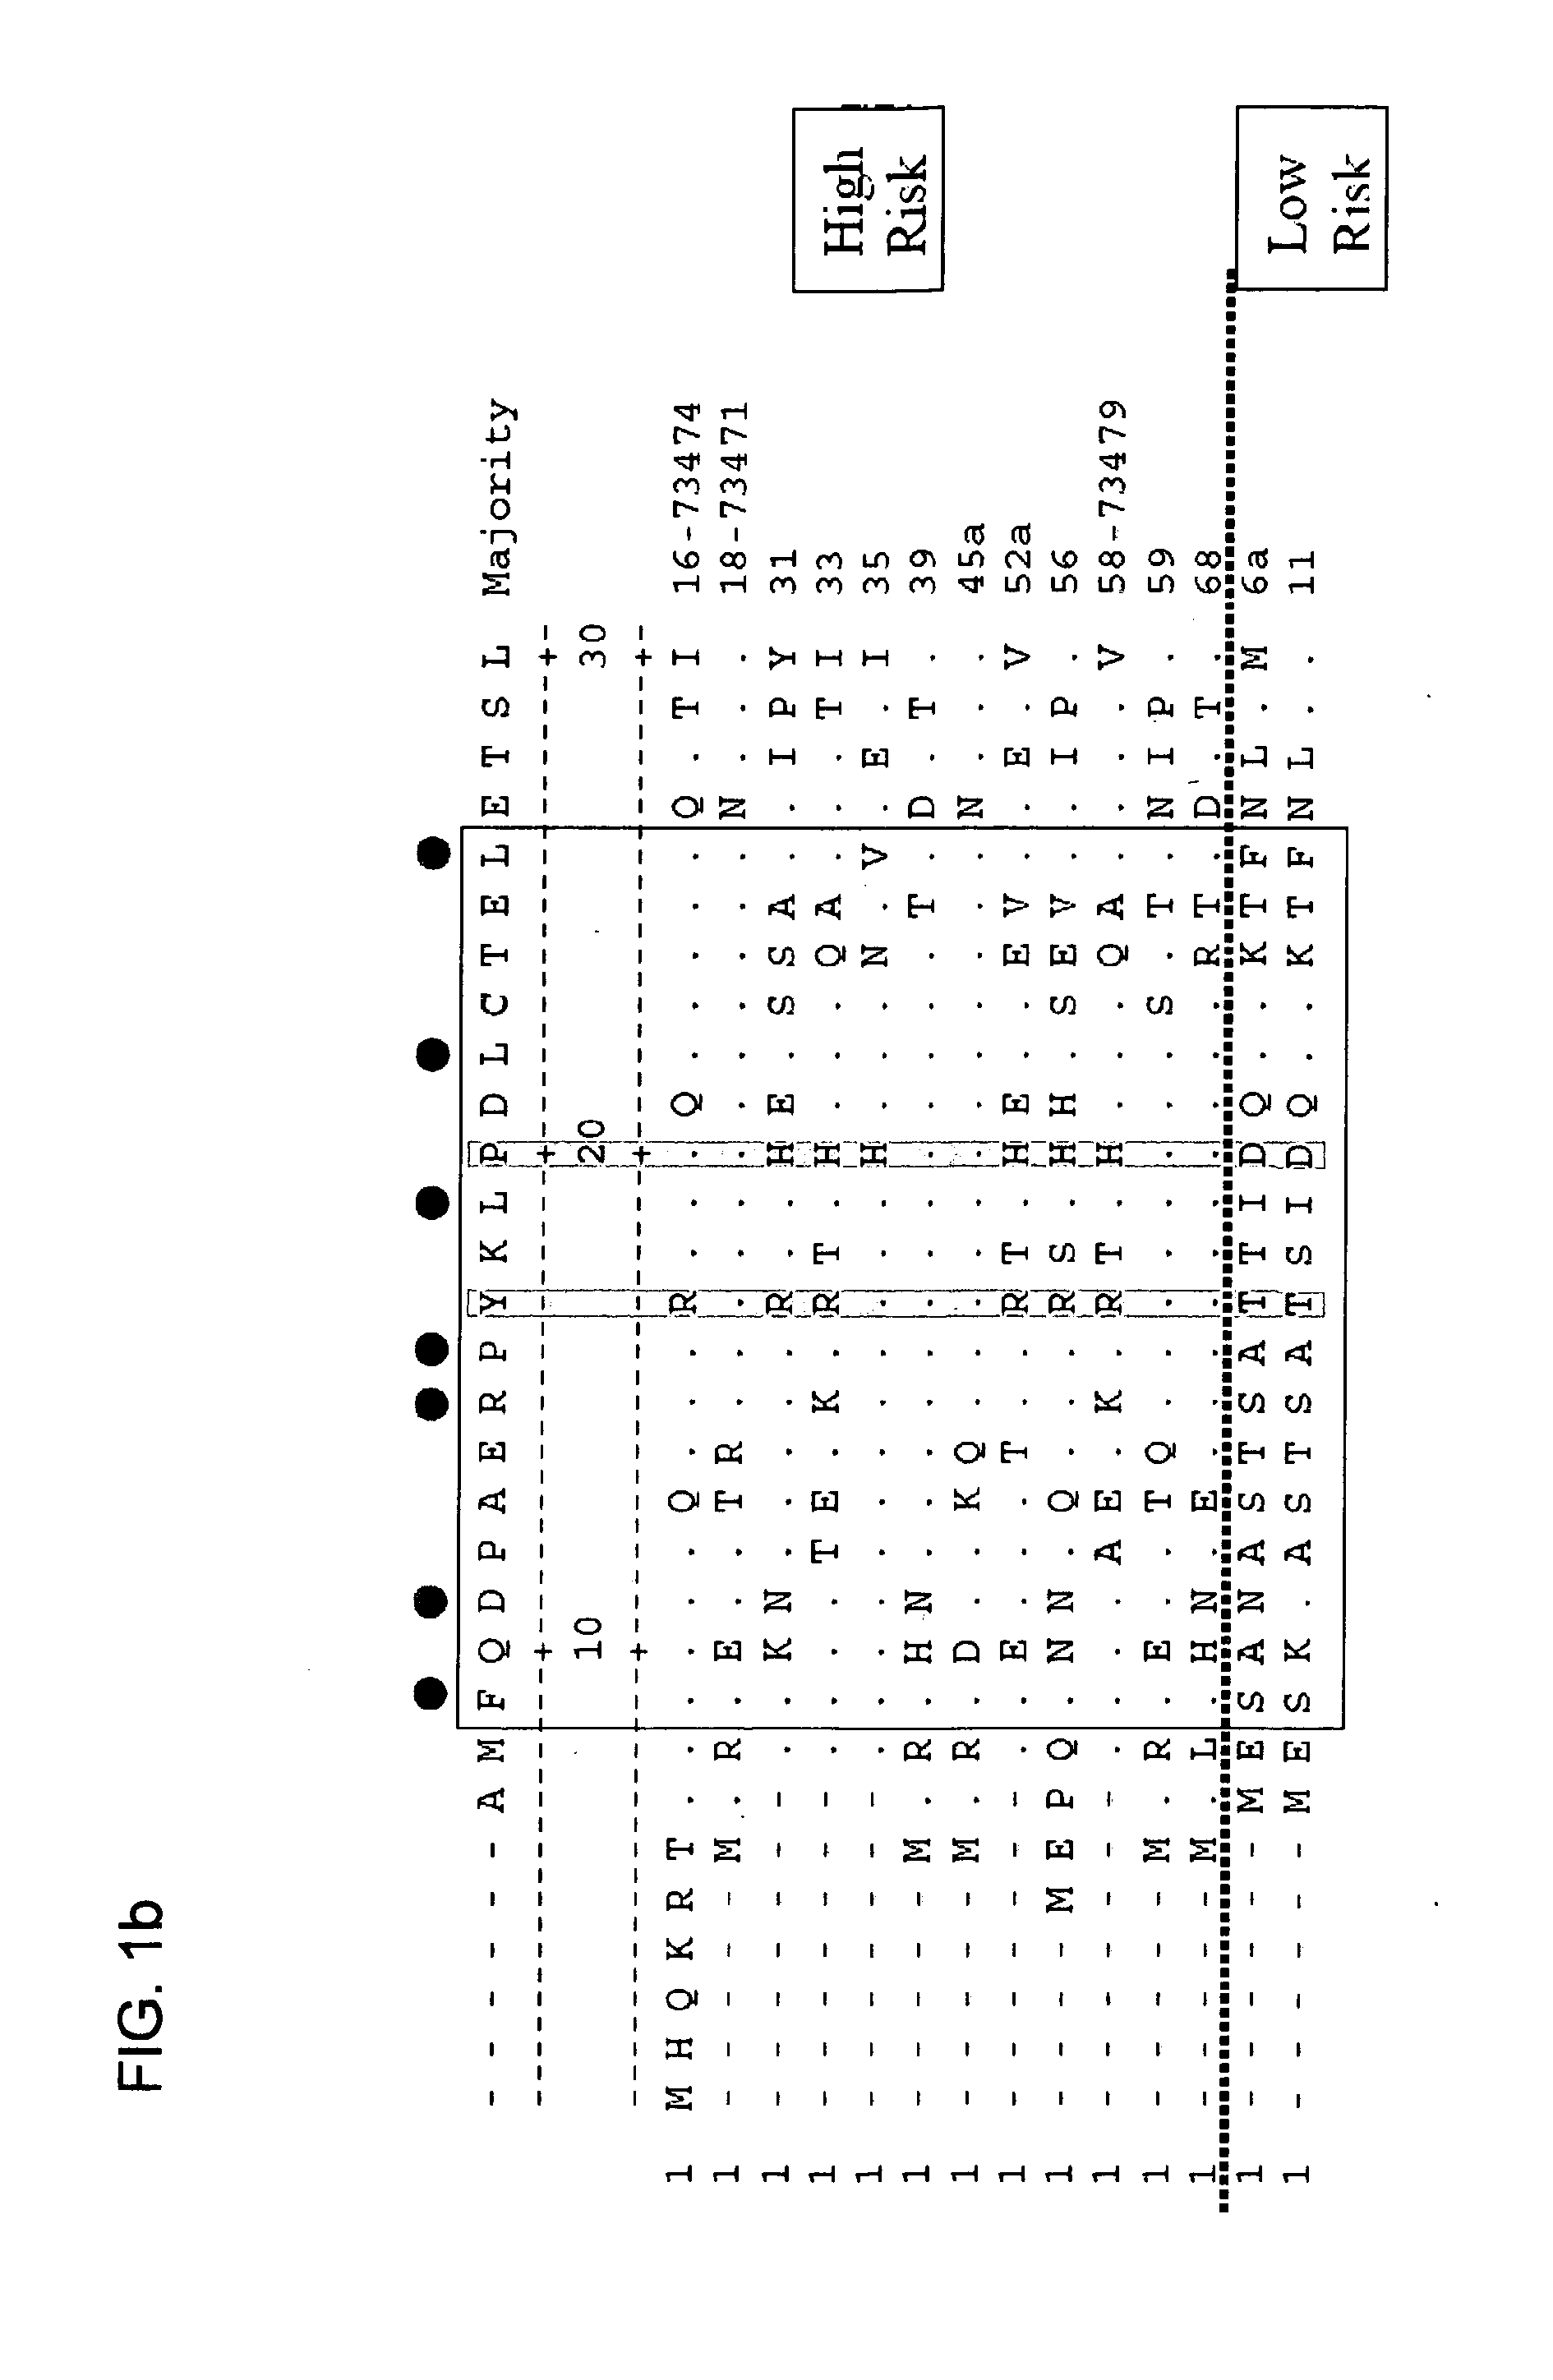 Antibodies specific to e6 proteins of HPV and use thereof